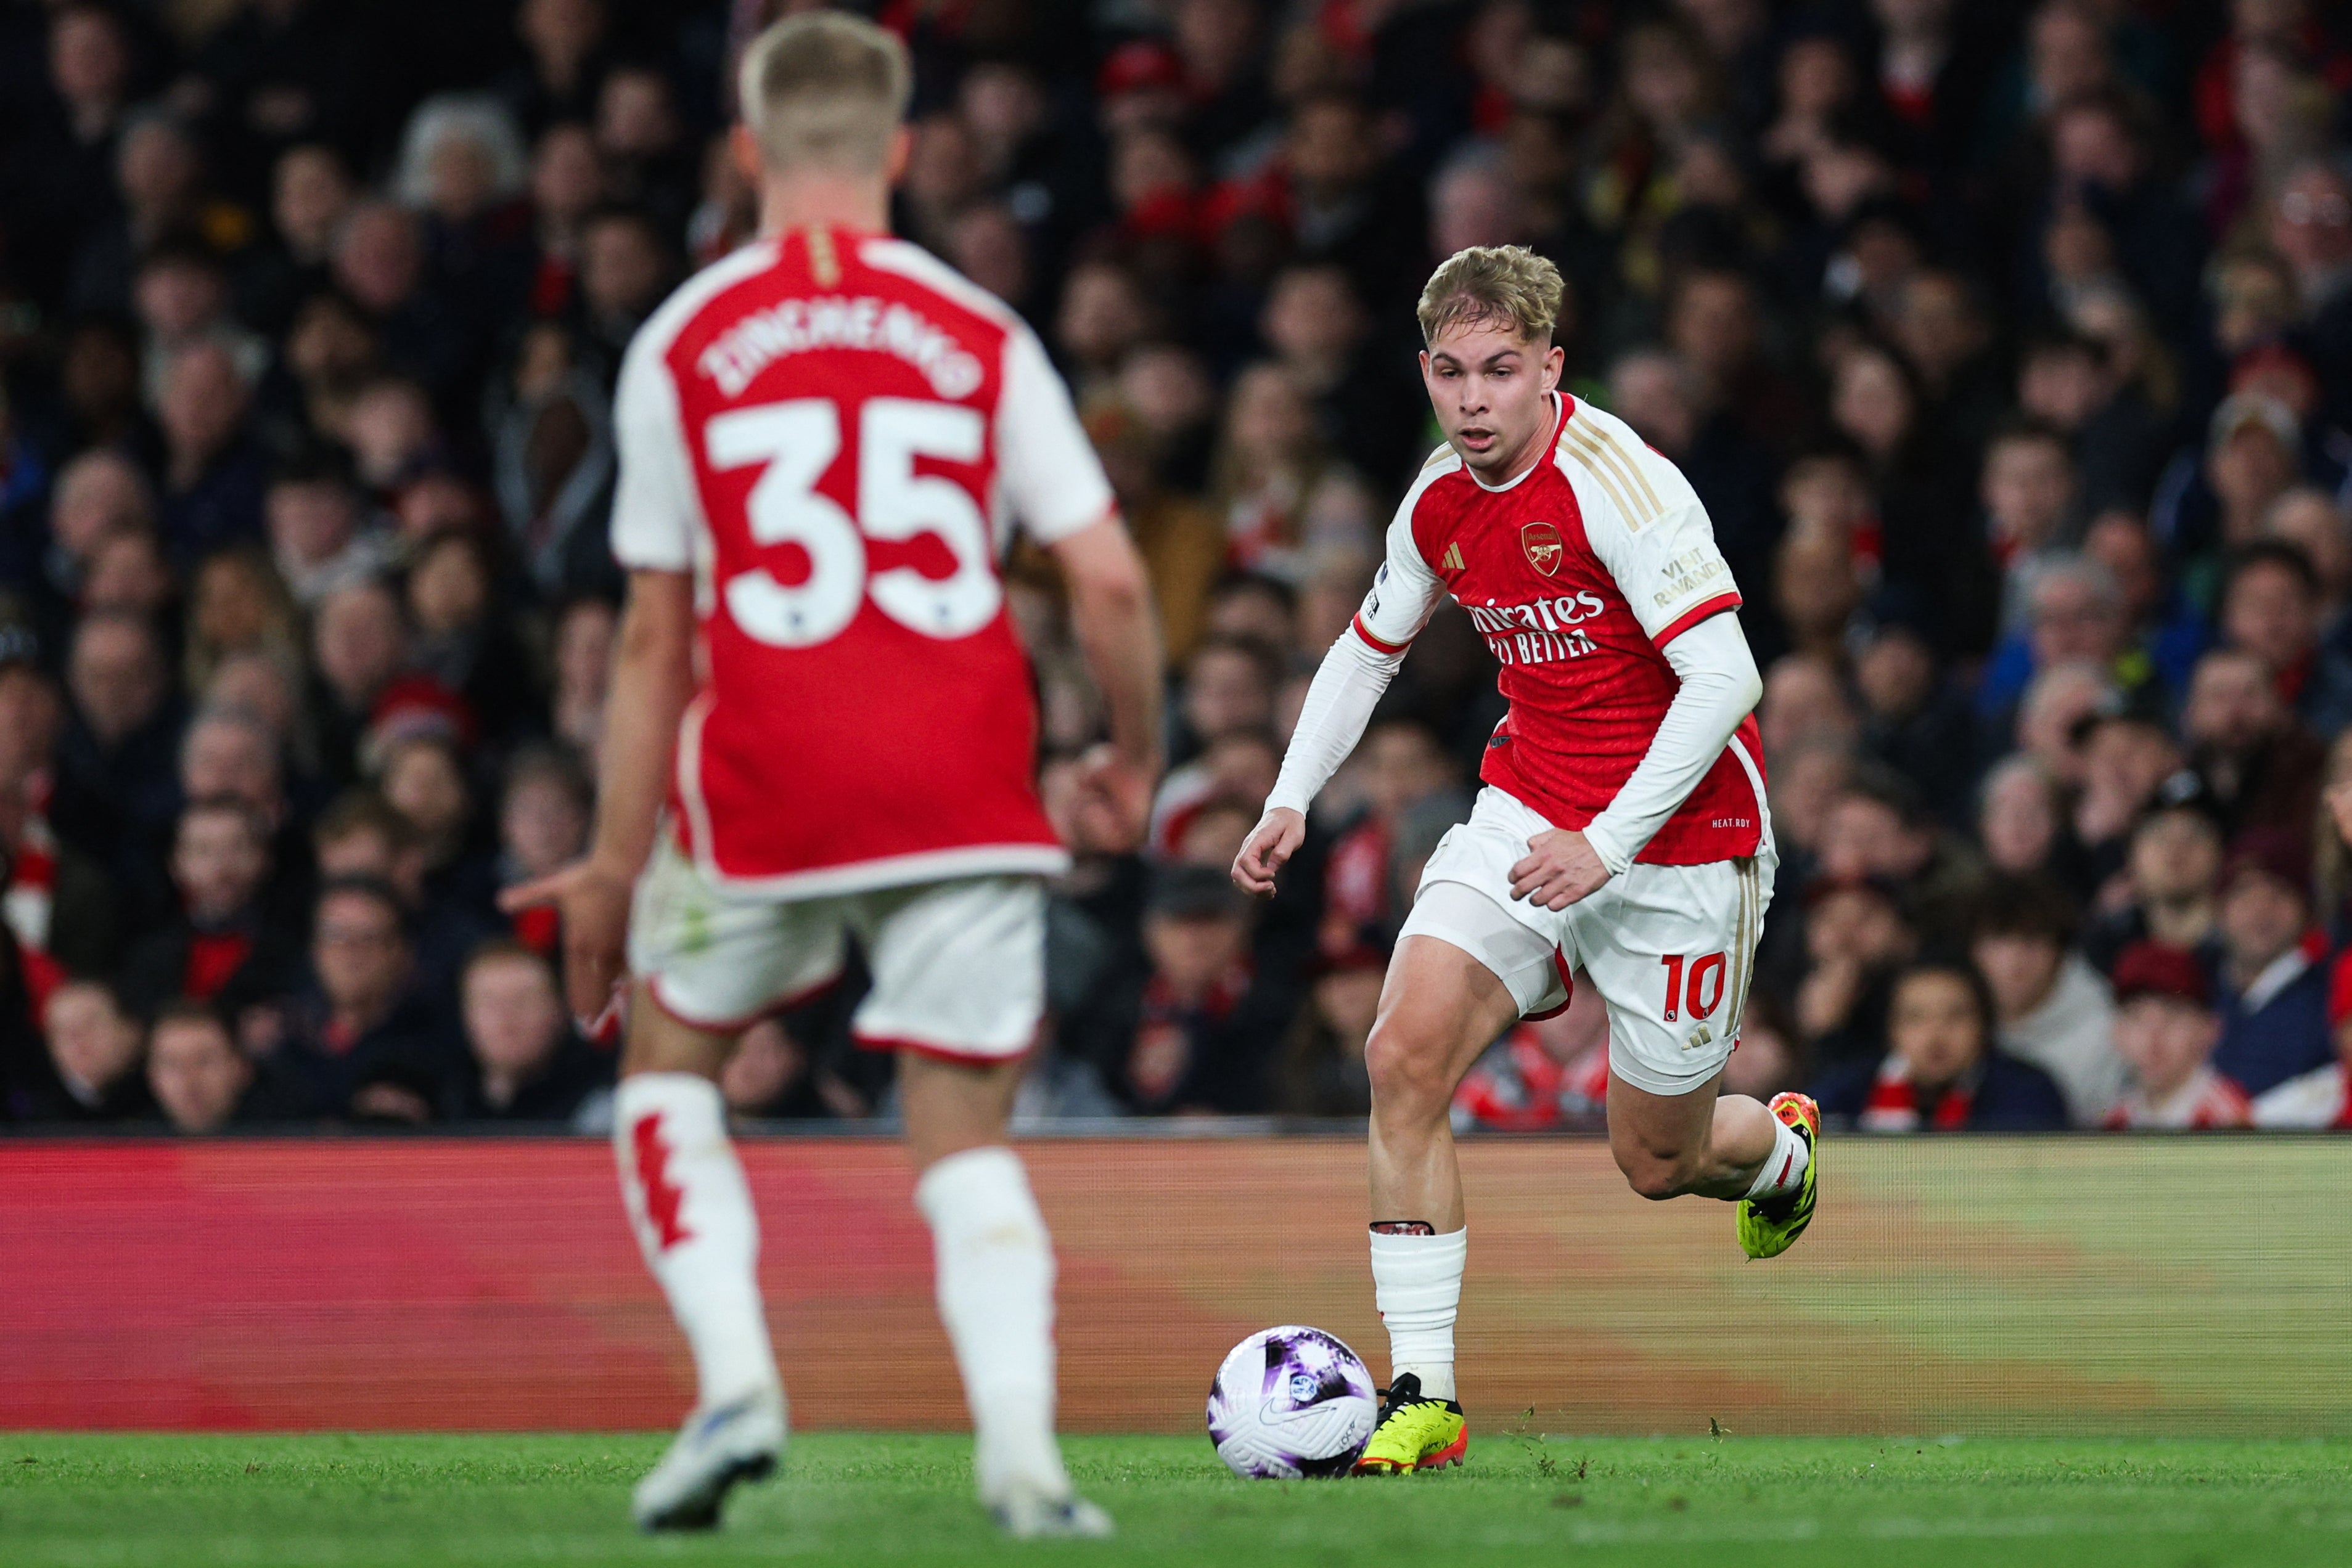 Emile Smith Rowe’s player of the match performance guided the Gunners to victory